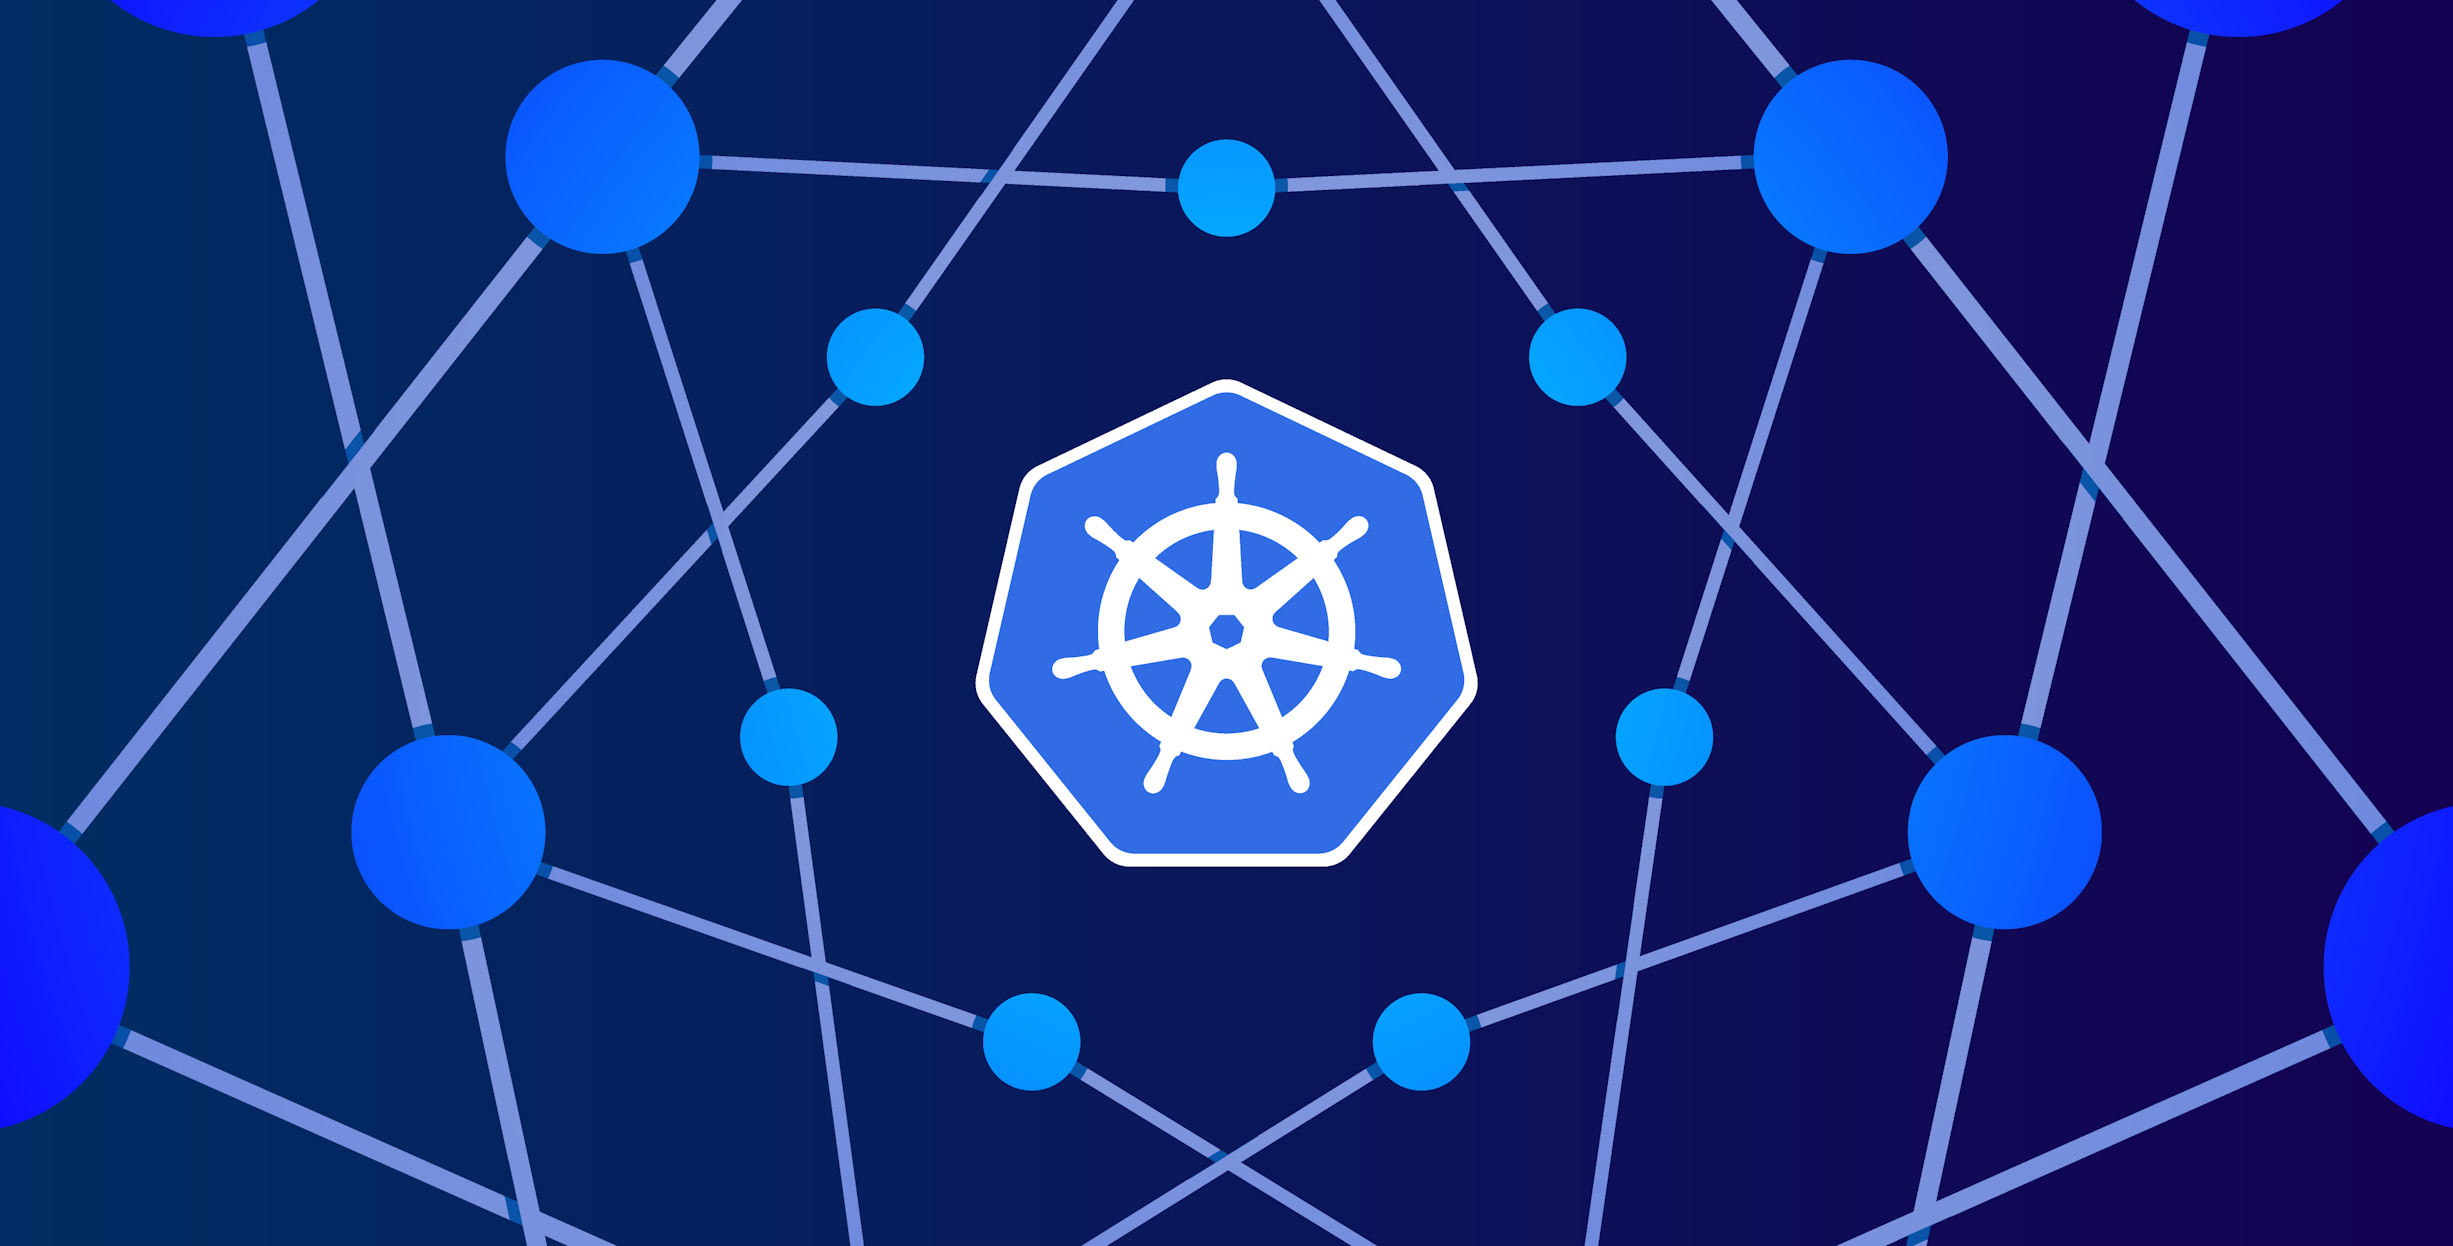 Kubehound: Identifying Attack Paths In Kubernetes Clusters